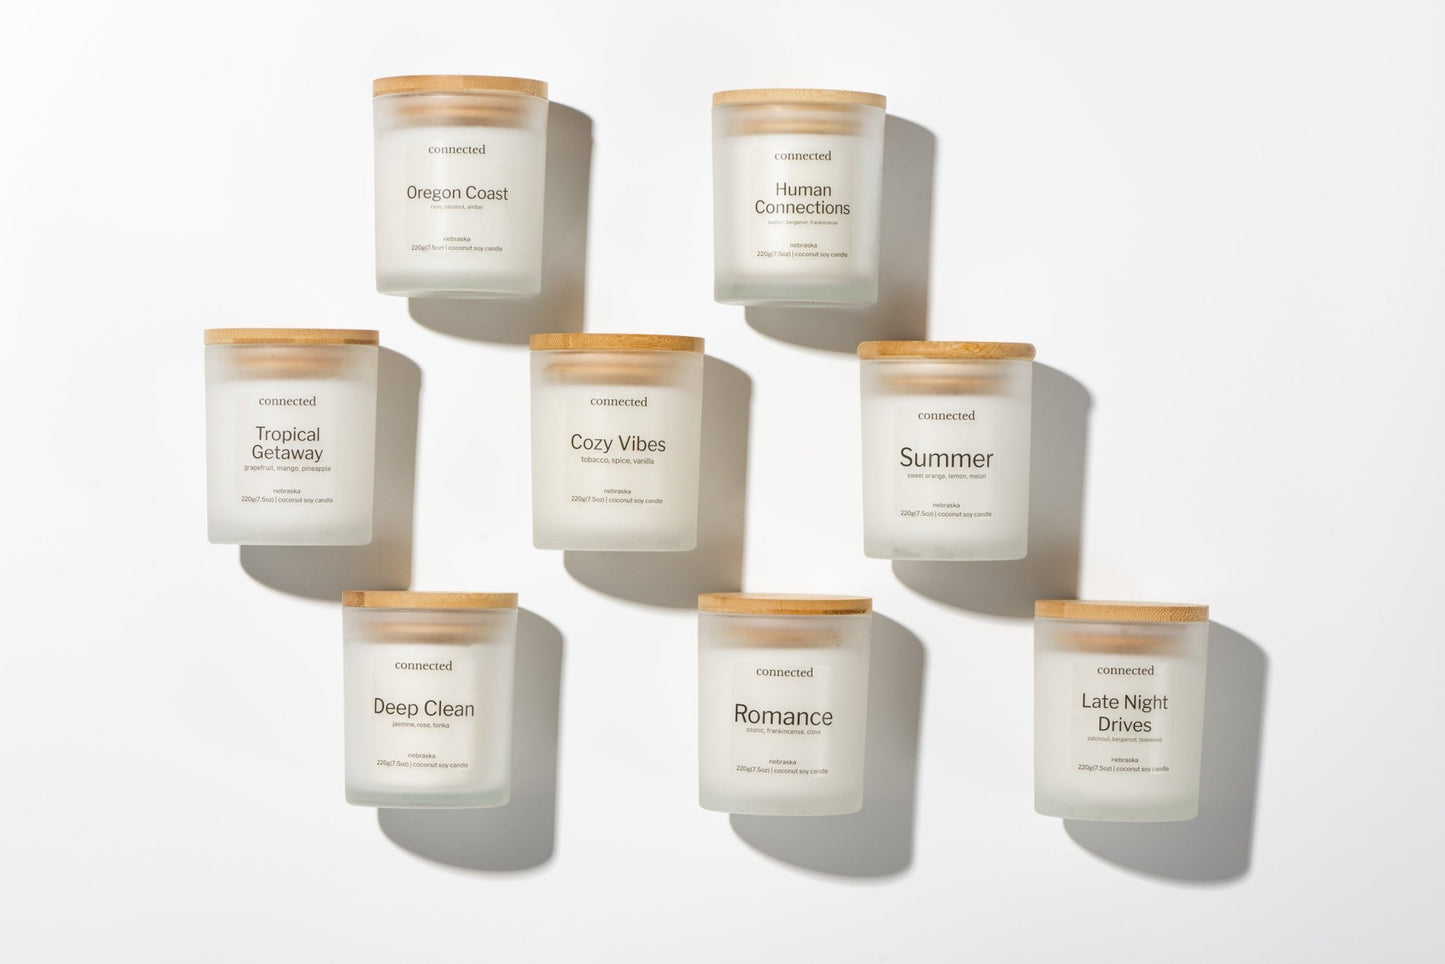 Human Connections -Coconut soy candle - Connected Fragrance Company - Connected